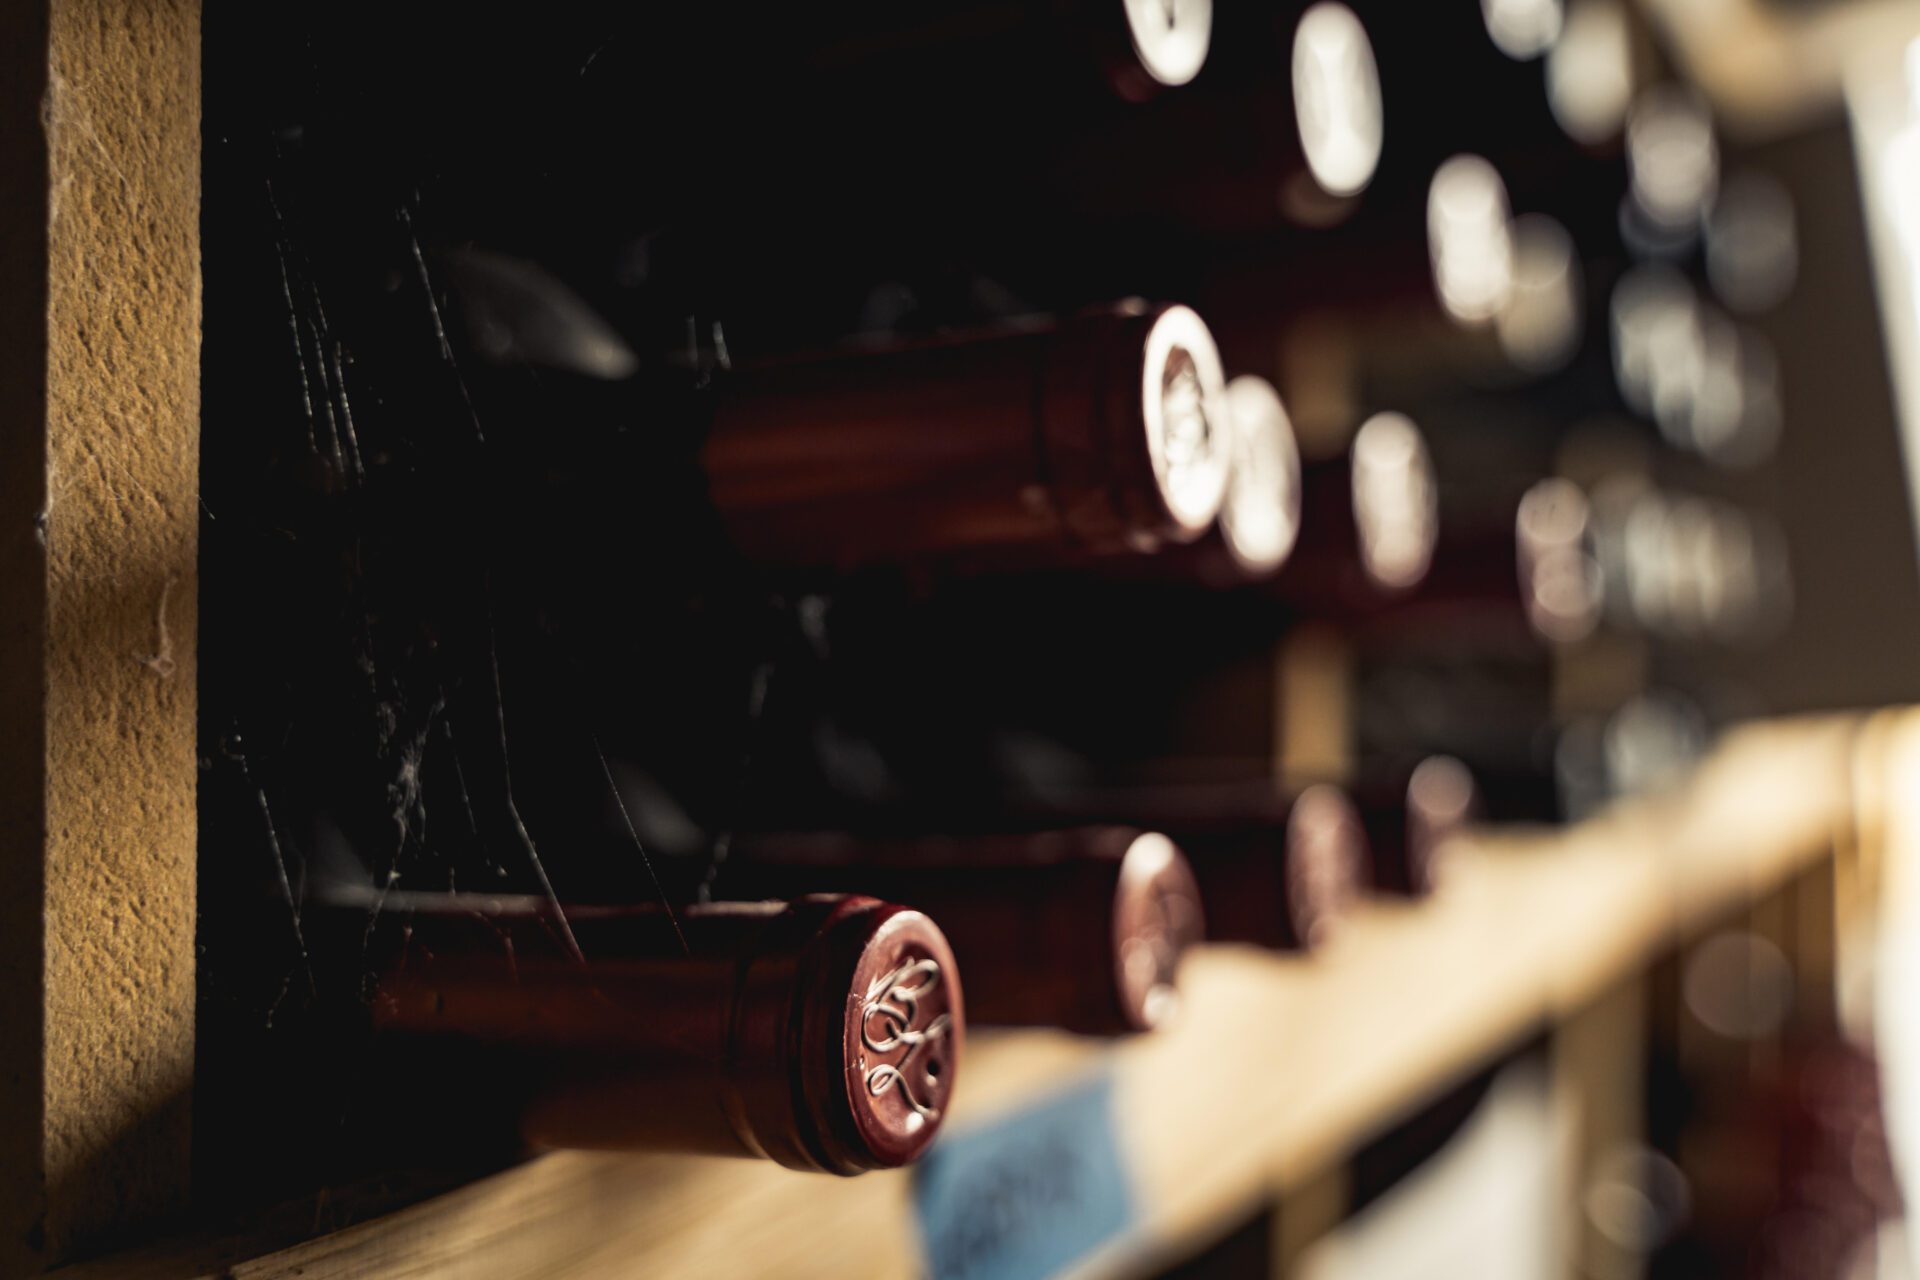 An array of Bella Luna Estate wine bottles elegantly arranged on a wooden shelf, showcasing a collection of fine wines with distinct labels and shapes.